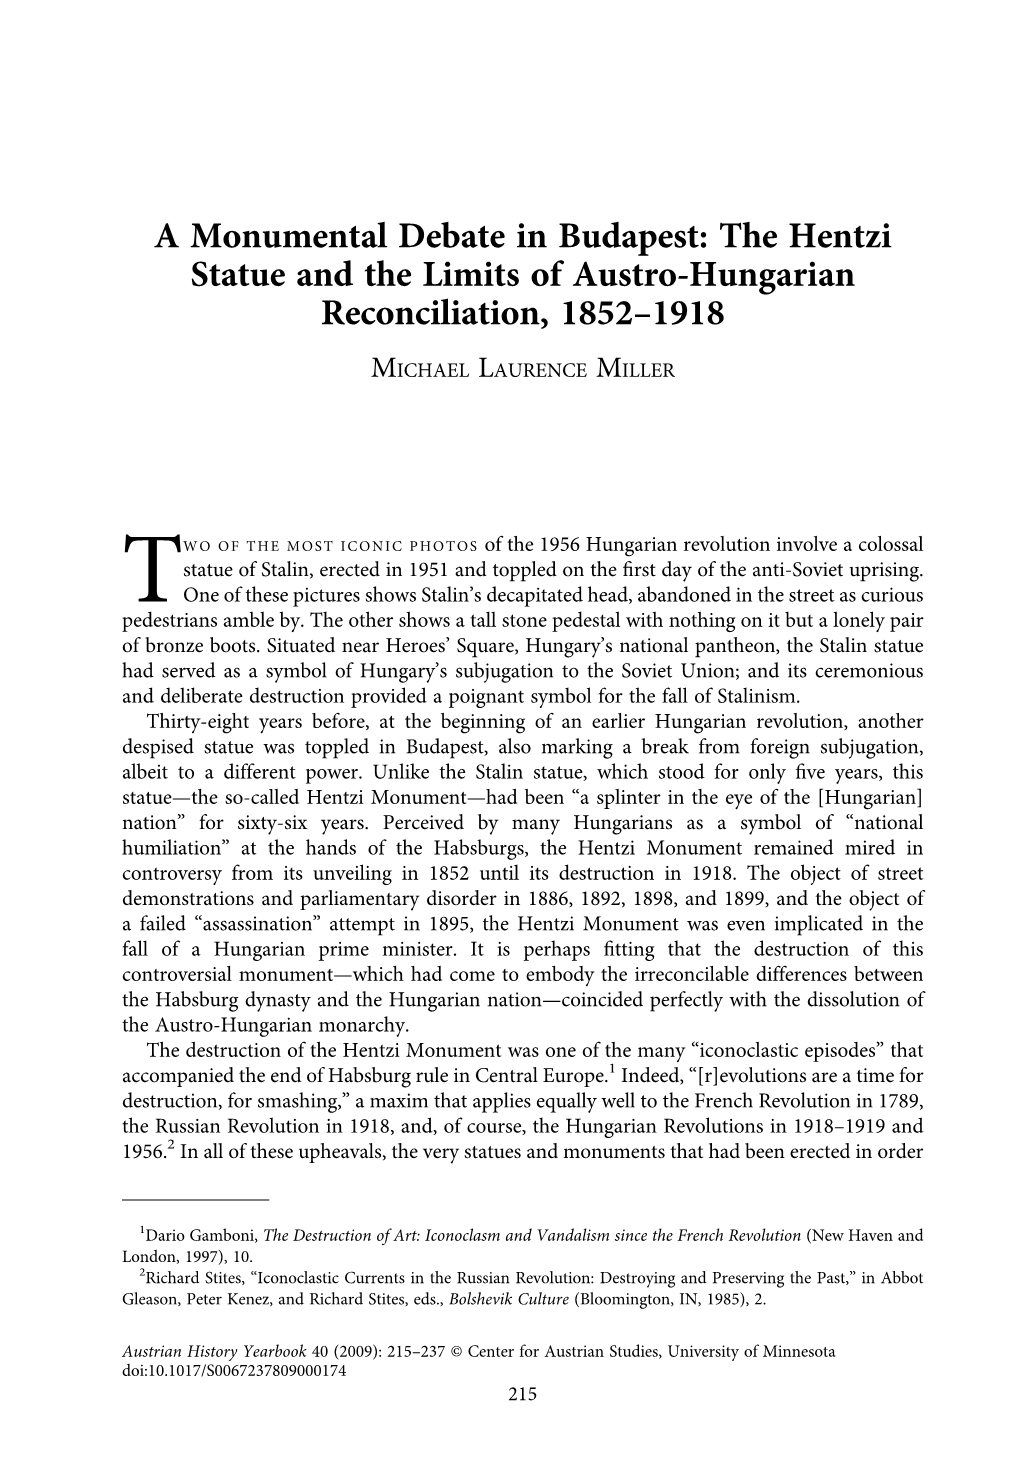 A Monumental Debate in Budapest: the Hentzi Statue and the Limits of Austro-Hungarian Reconciliation, 1852–1918